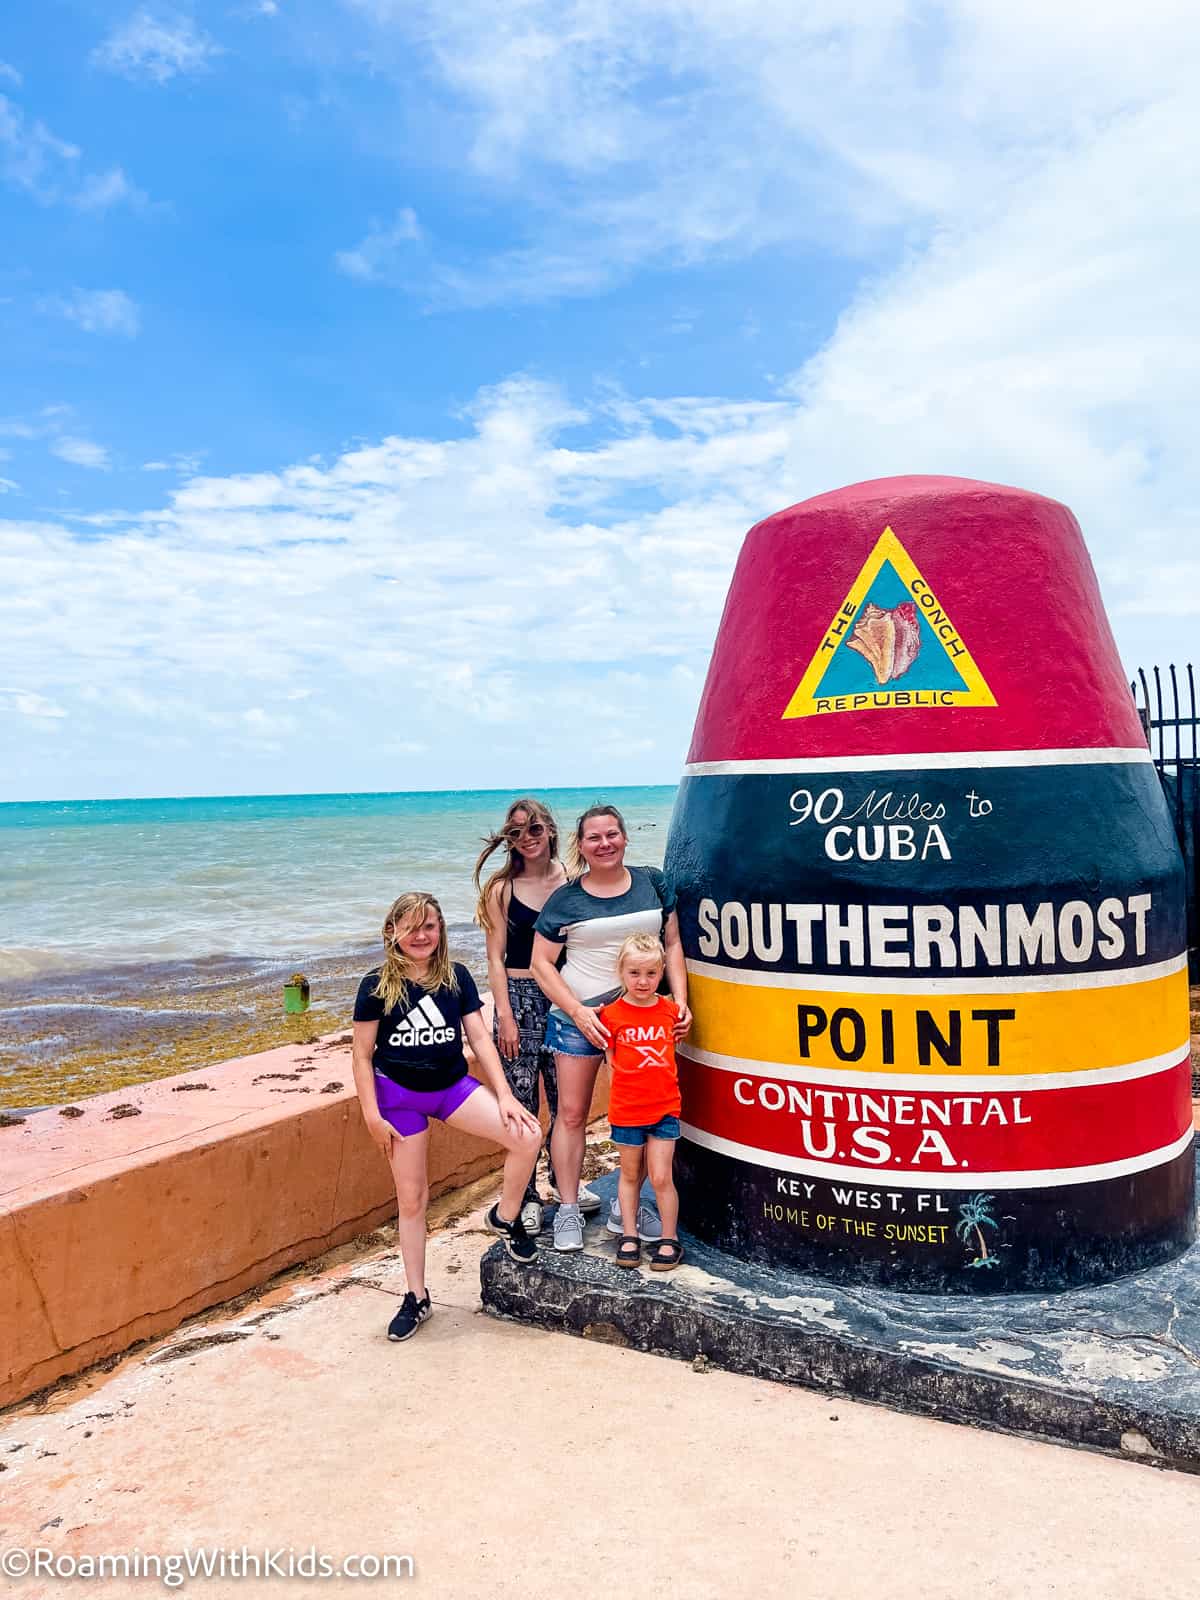 Our Day Trip to Key West Florida With Kids